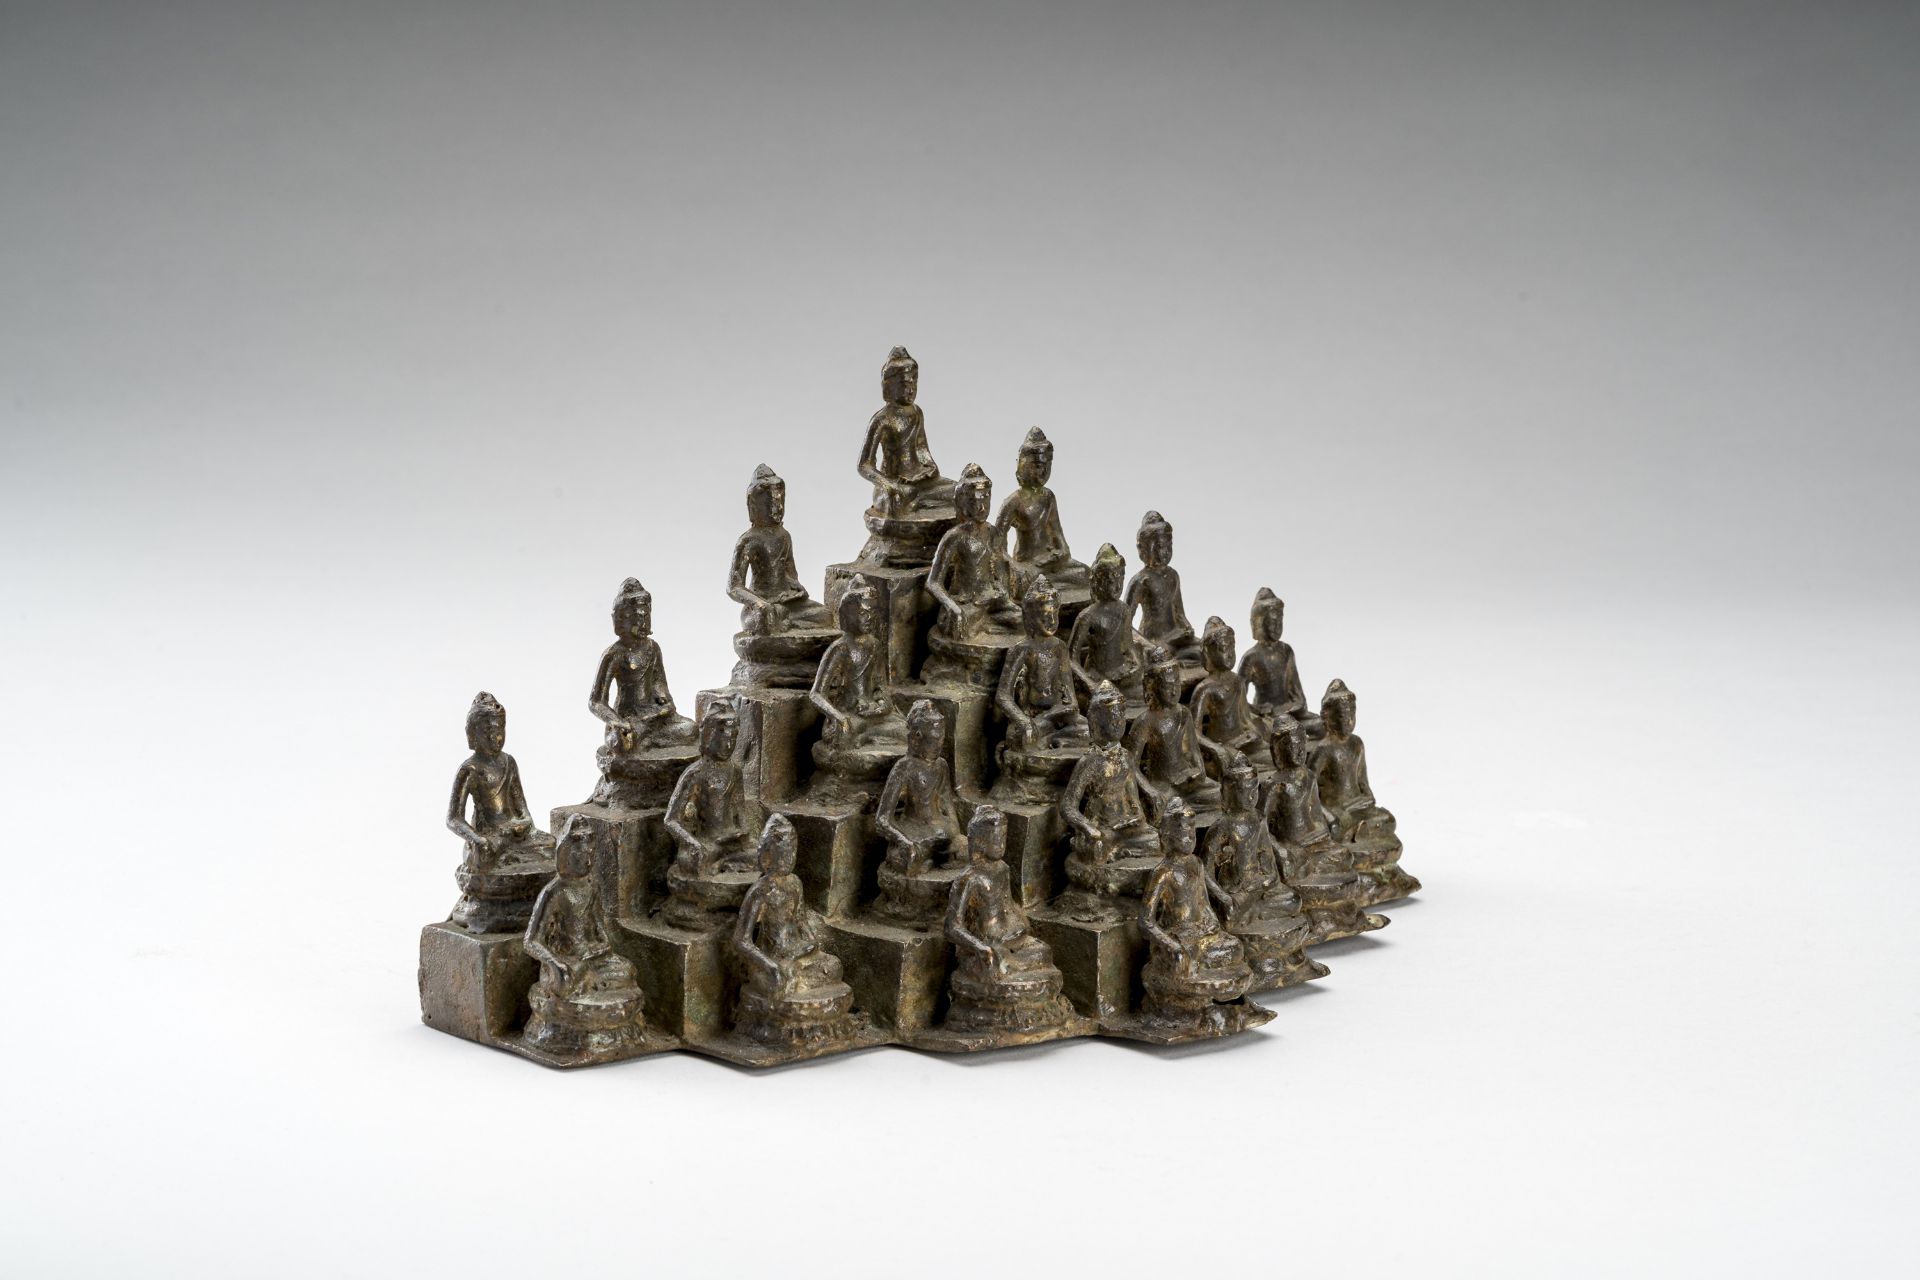 A JAVANESE SCULPTURAL BRONZE GROUP DEPICTING 23 SEATED BUDDHA - Image 5 of 8